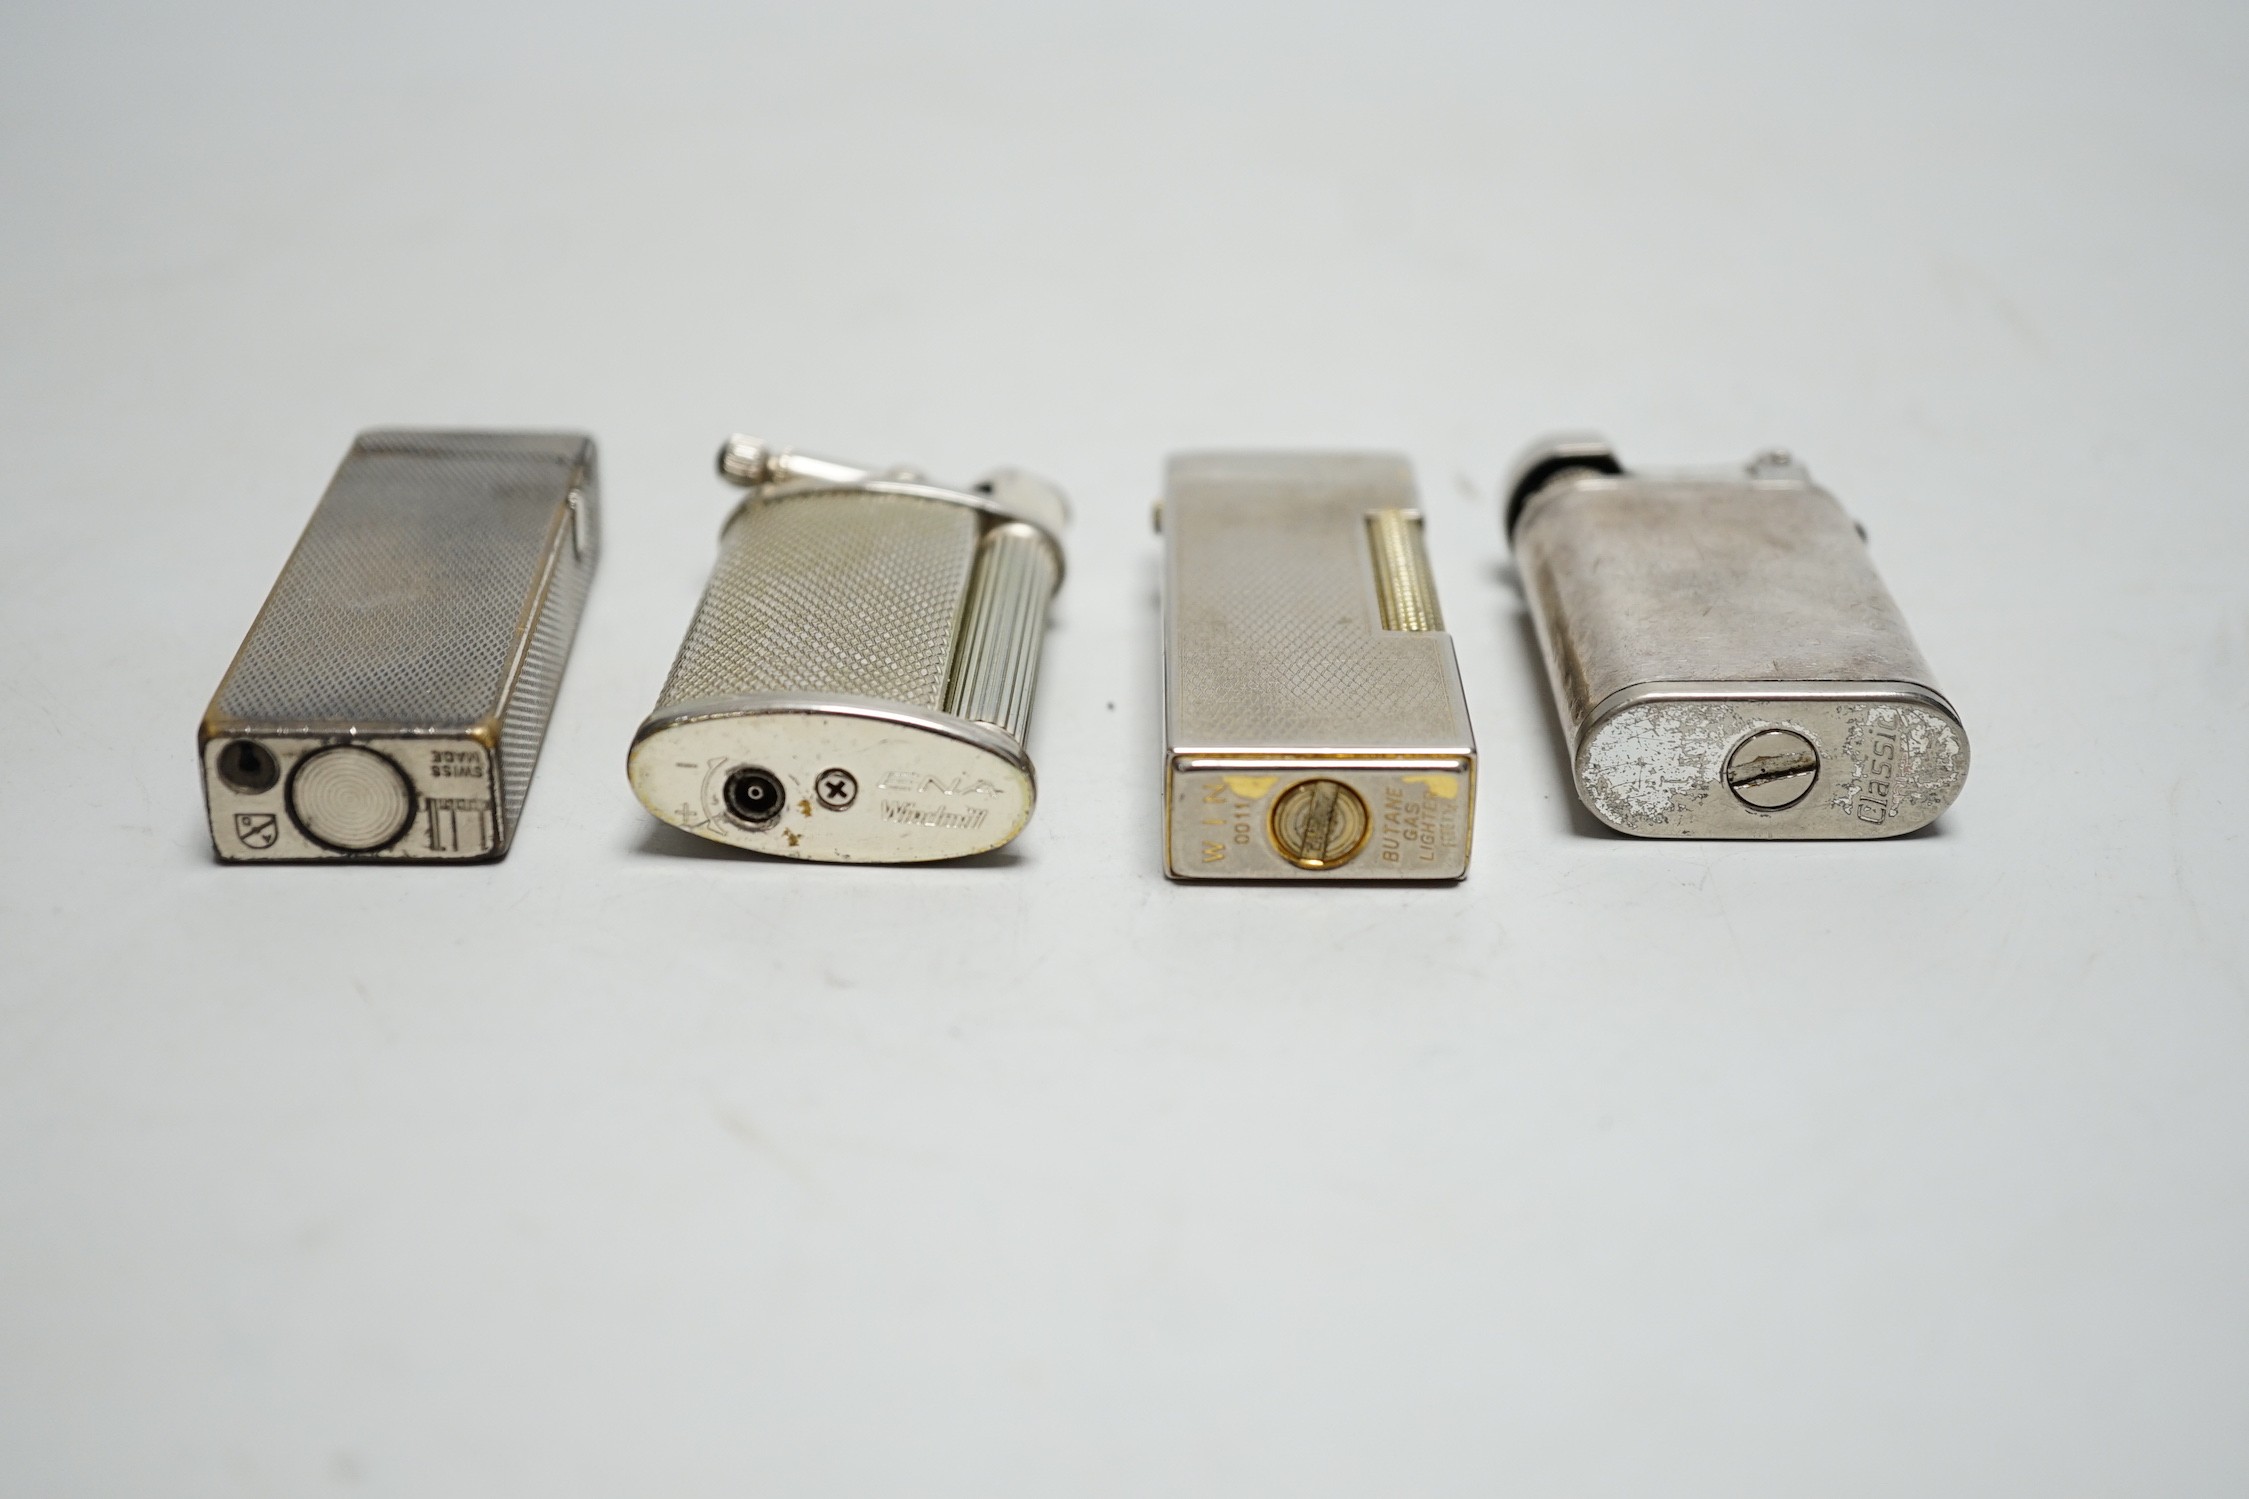 A Dunhill Rollegas lighter and four others